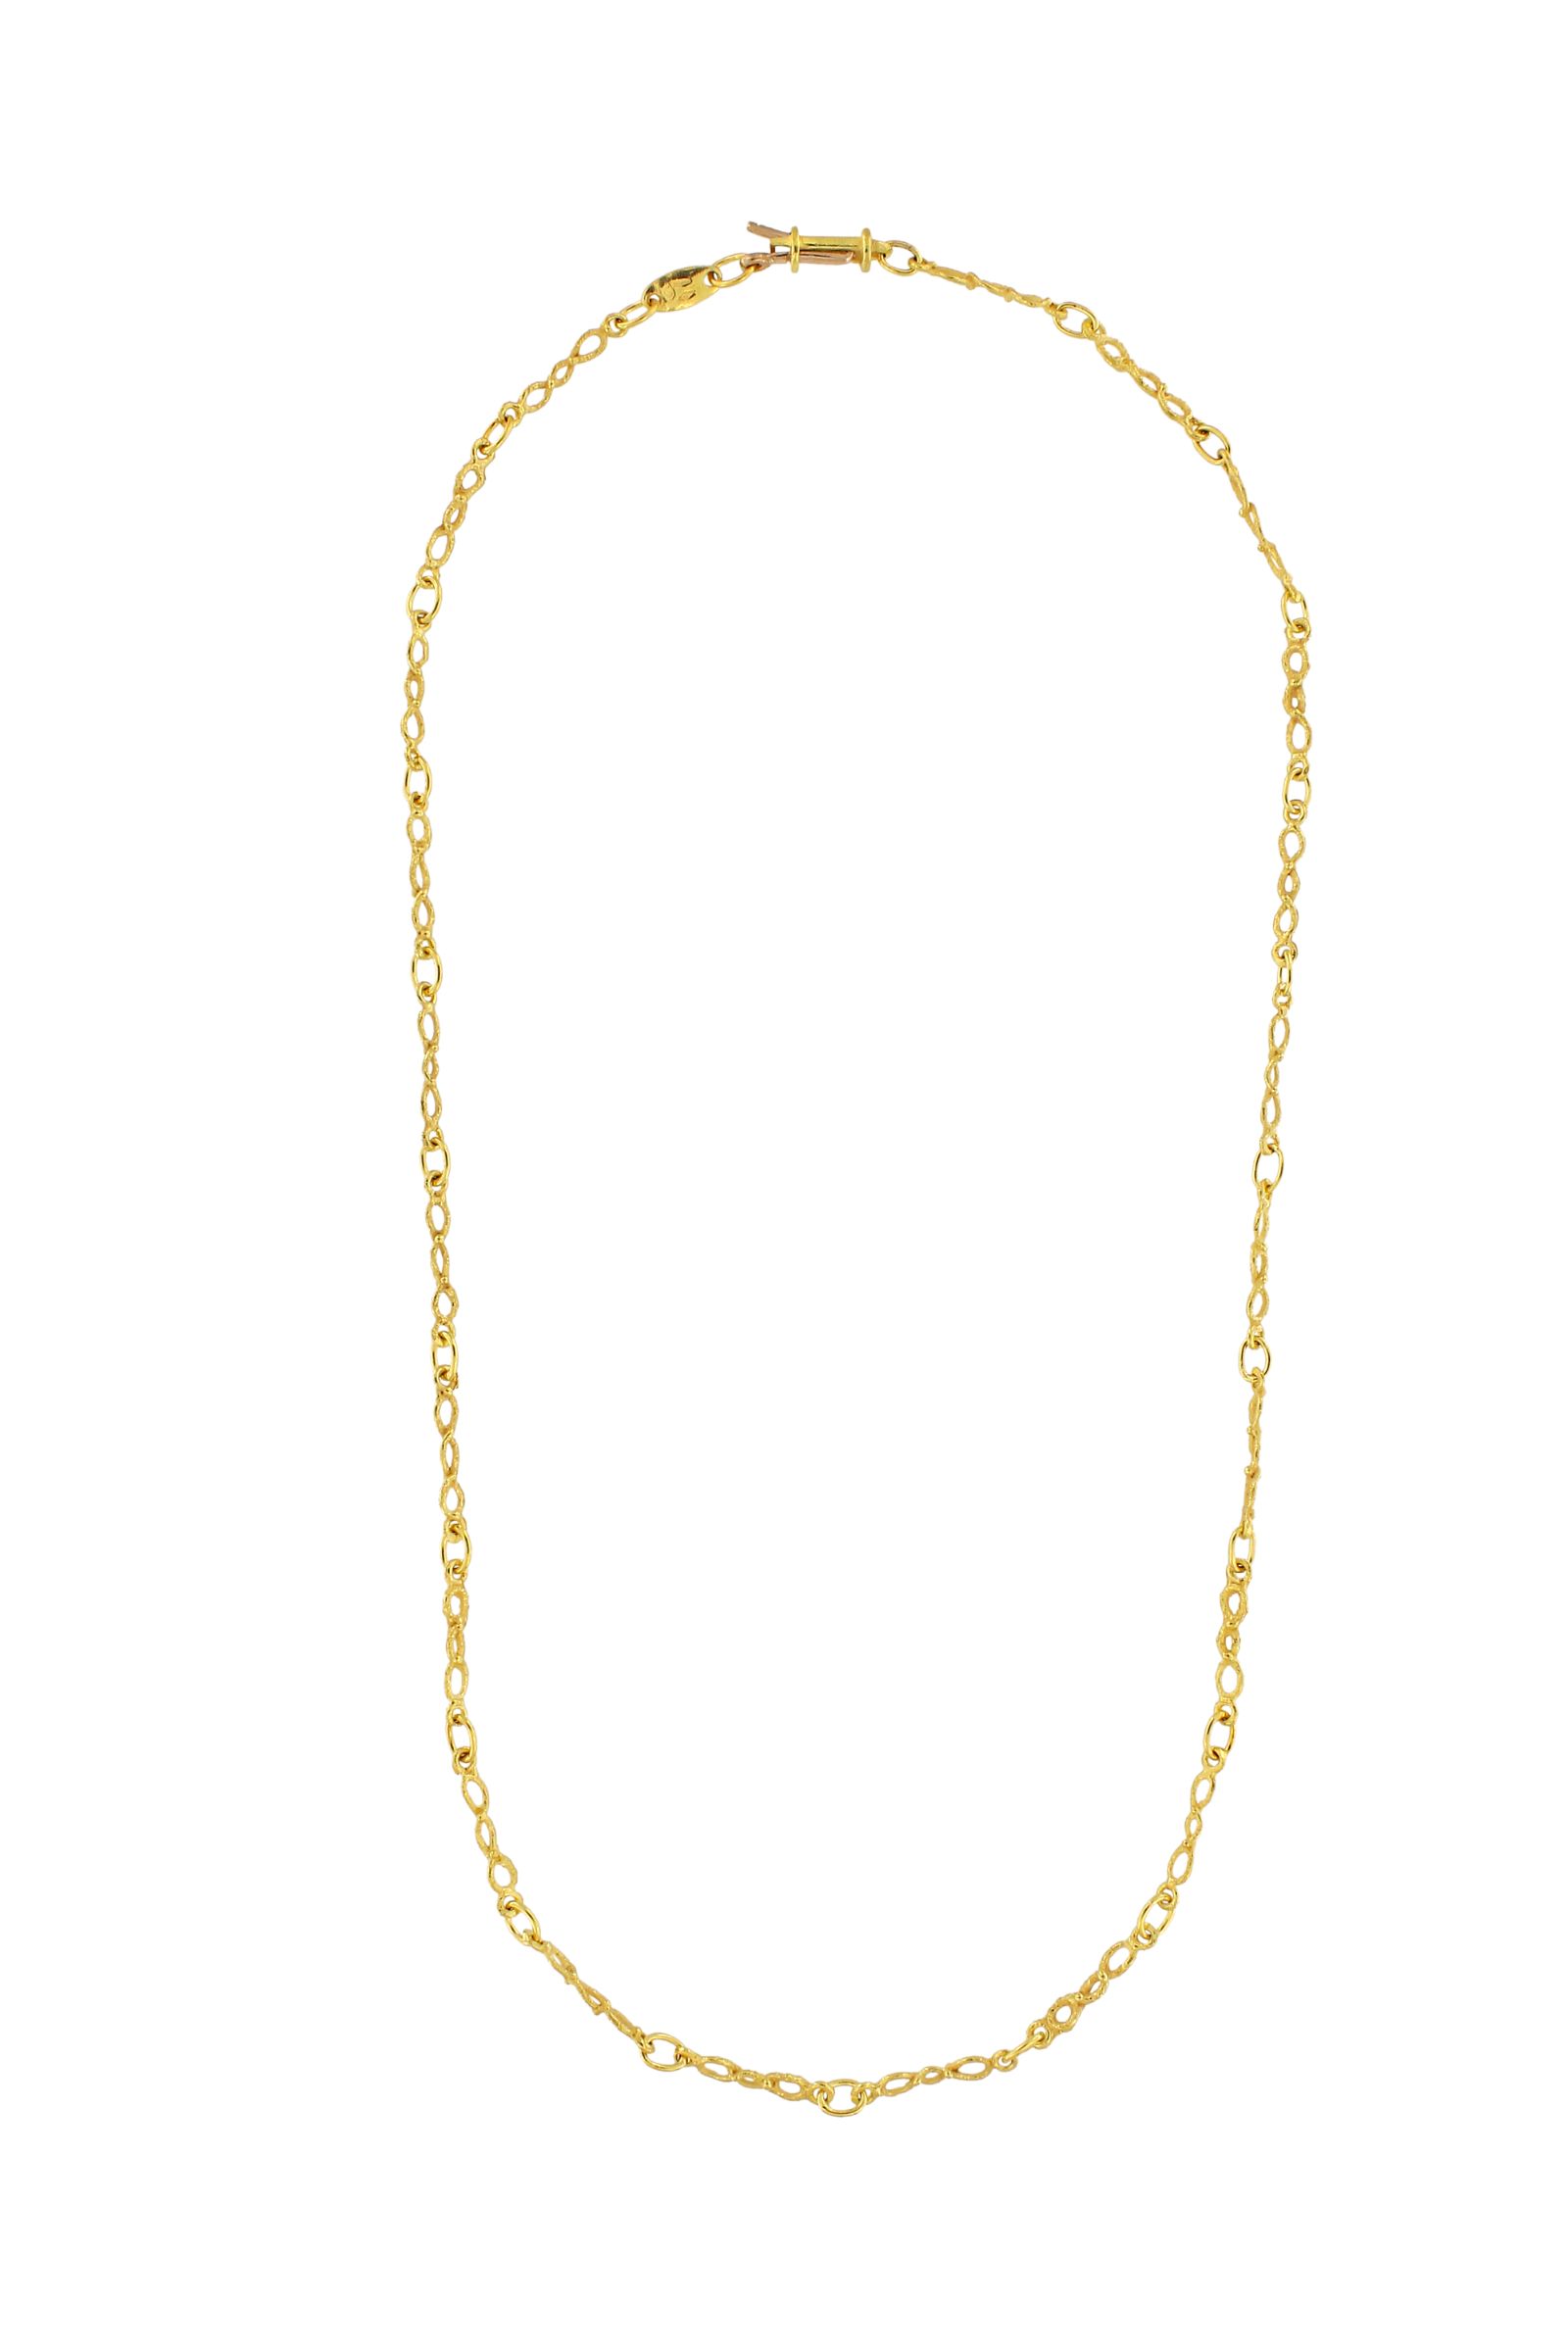 SA124B-18-Kt-Yellow-Gold-Chain-Necklace-1_